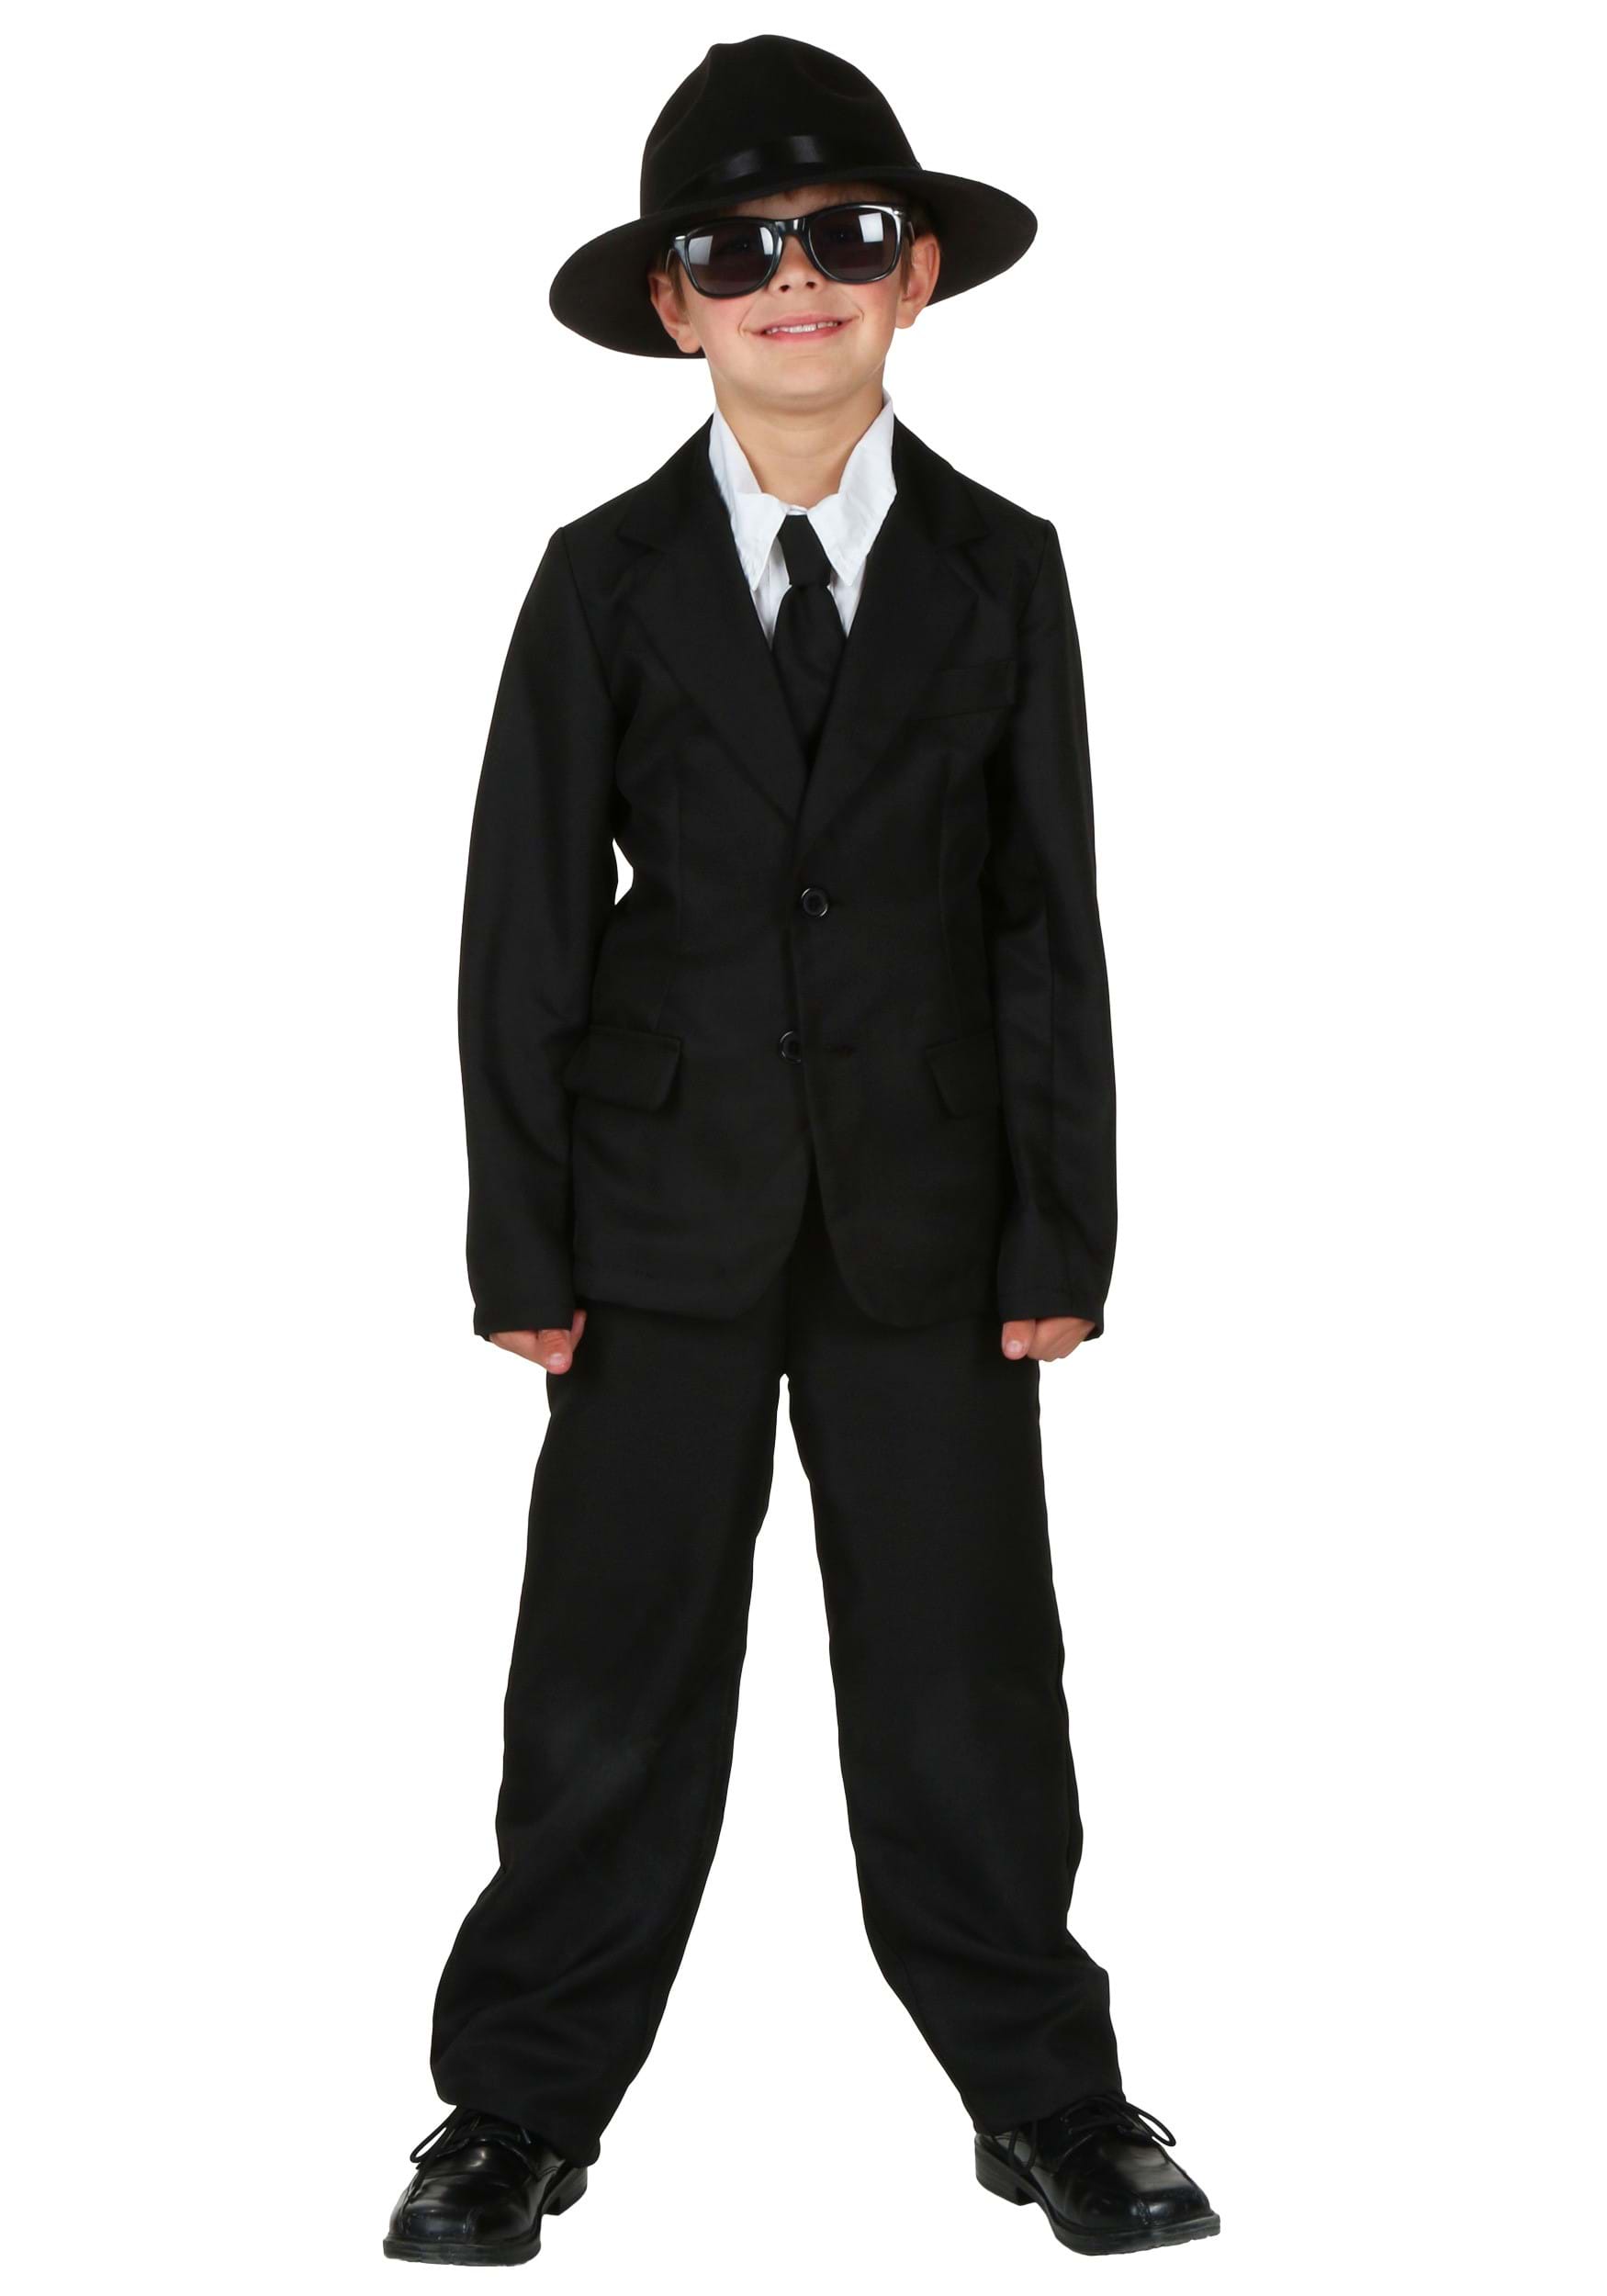 Children's Spring Black Suit Set/Blazer Pants 2 Pieces Outfit Kids Party  Performance Costume/Formal Birthday Party Boys Clothes - AliExpress